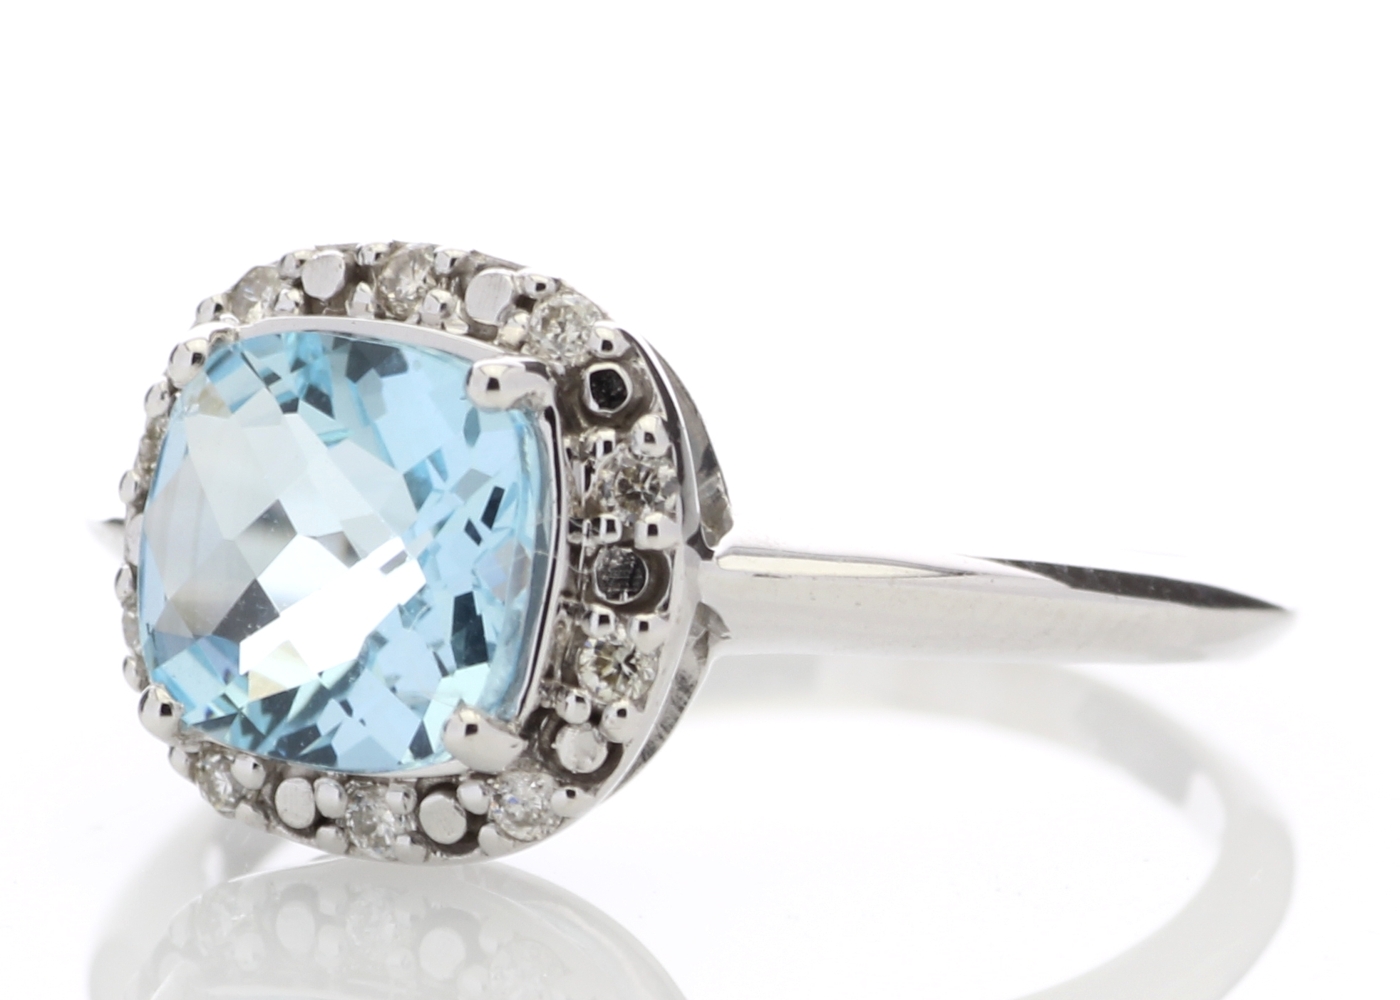 9ct White Gold Diamond And Blue Topaz Ring (BT1.79) 0.10 Carats - Image 2 of 10